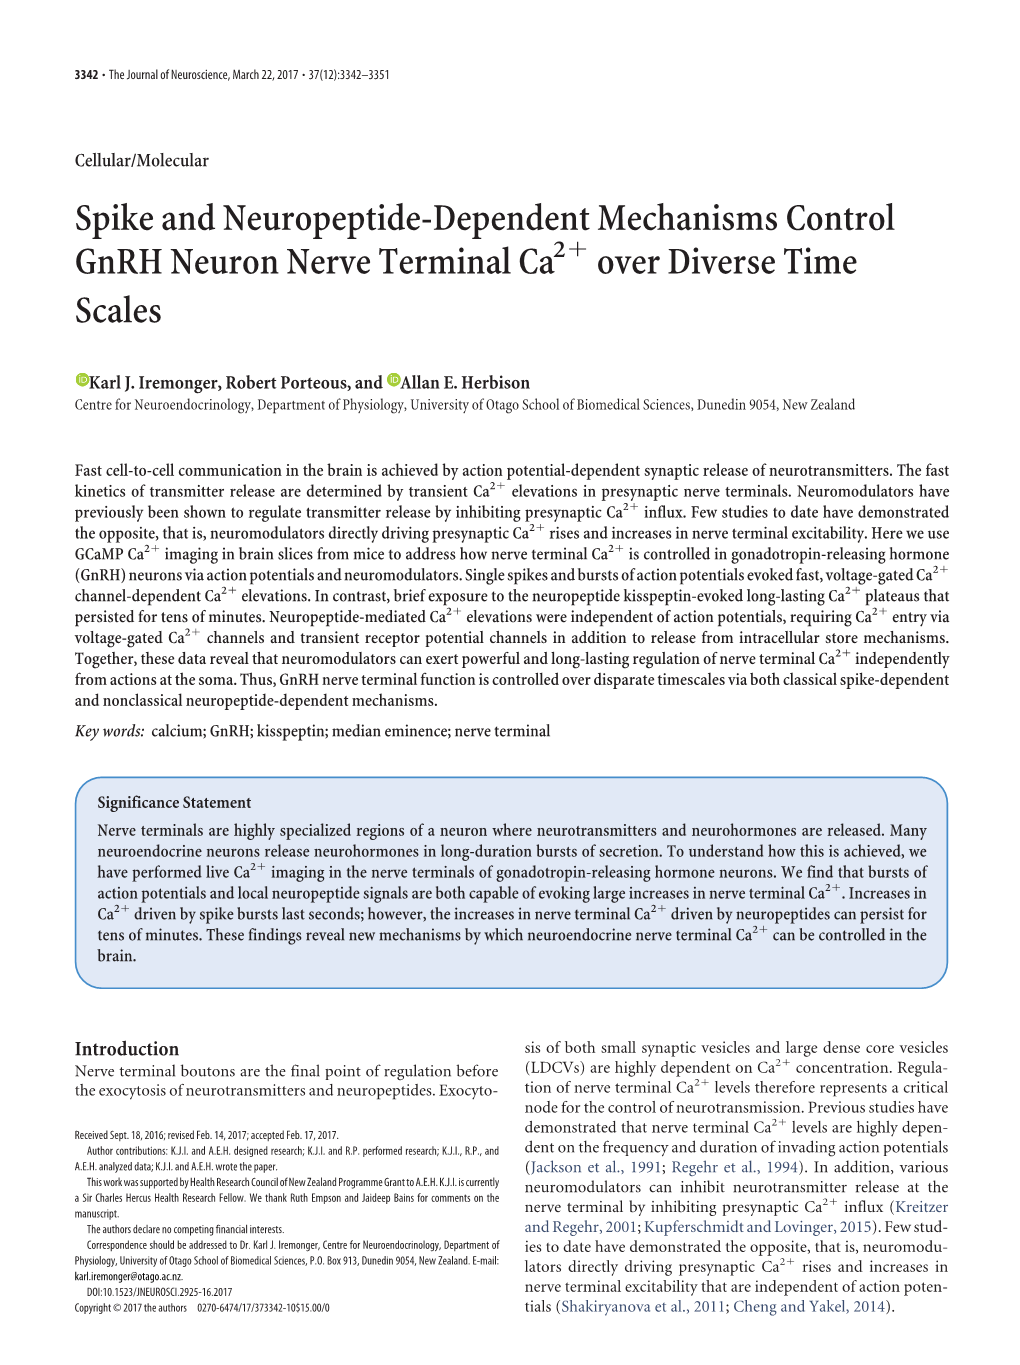 Spike and Neuropeptide-Dependent Mechanisms Control Gnrh Neuron Nerve Terminal Ca2ϩ Over Diverse Time Scales